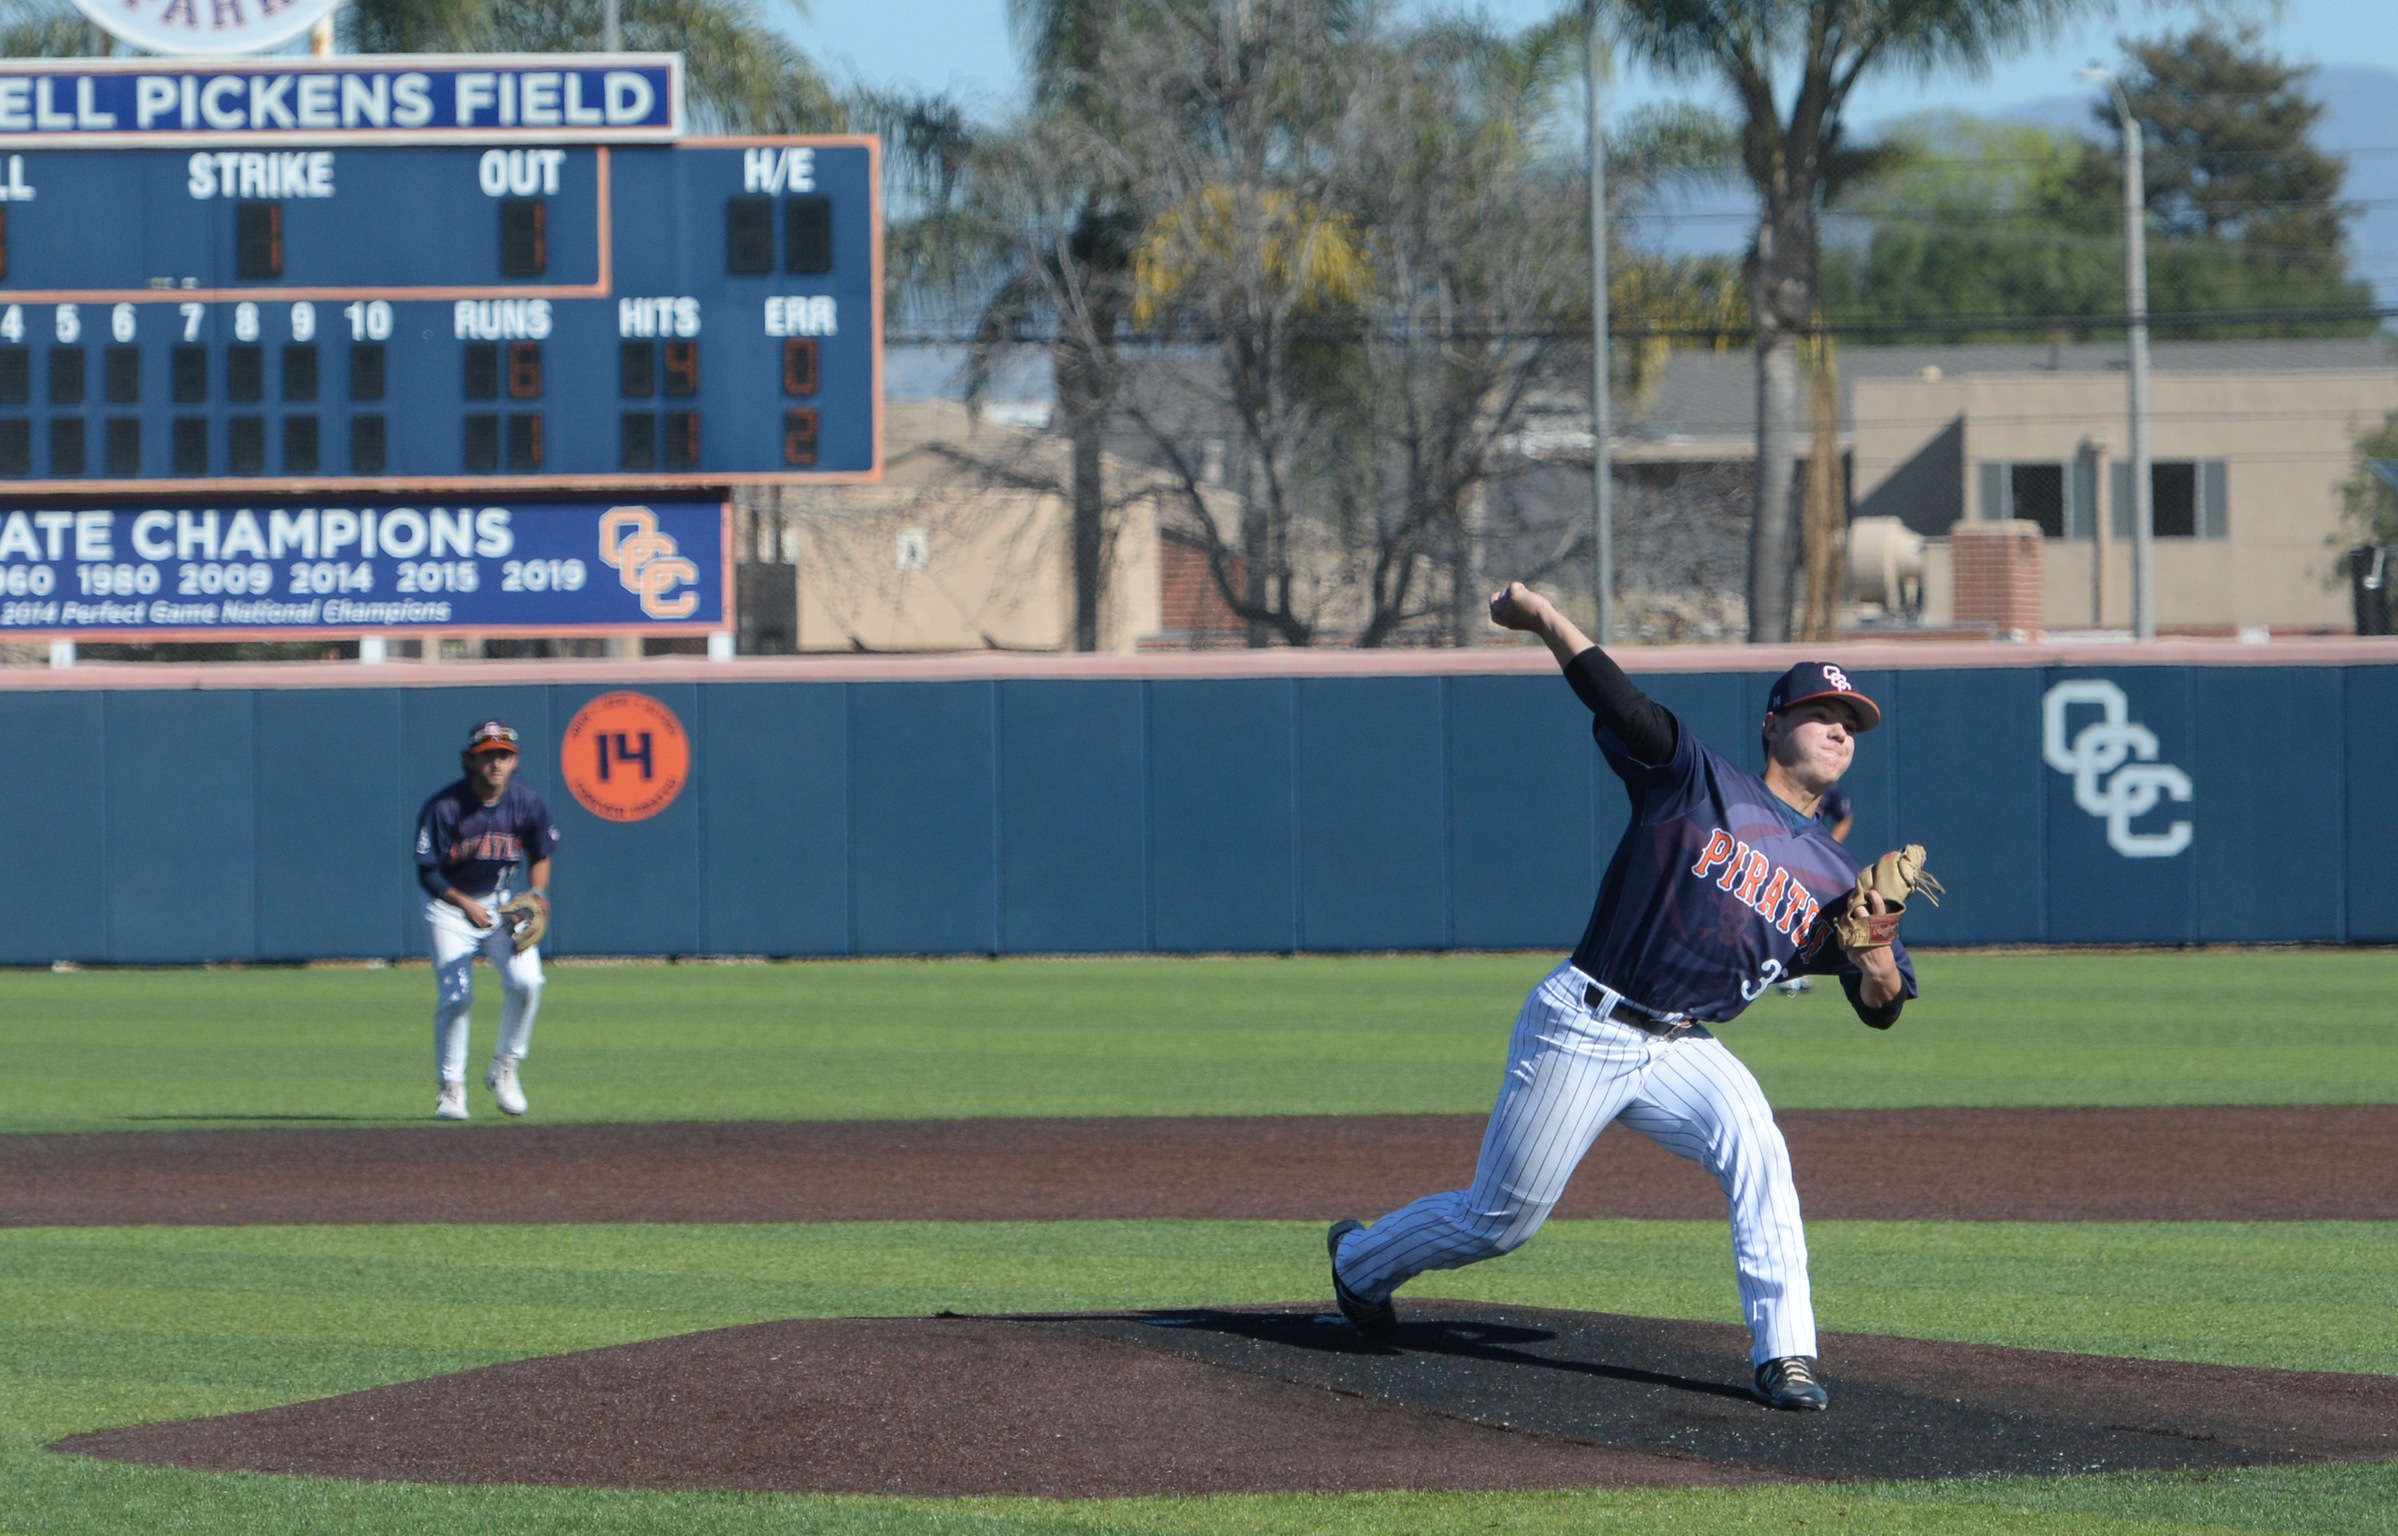 Pirates swept by Rustlers with 7-2 loss